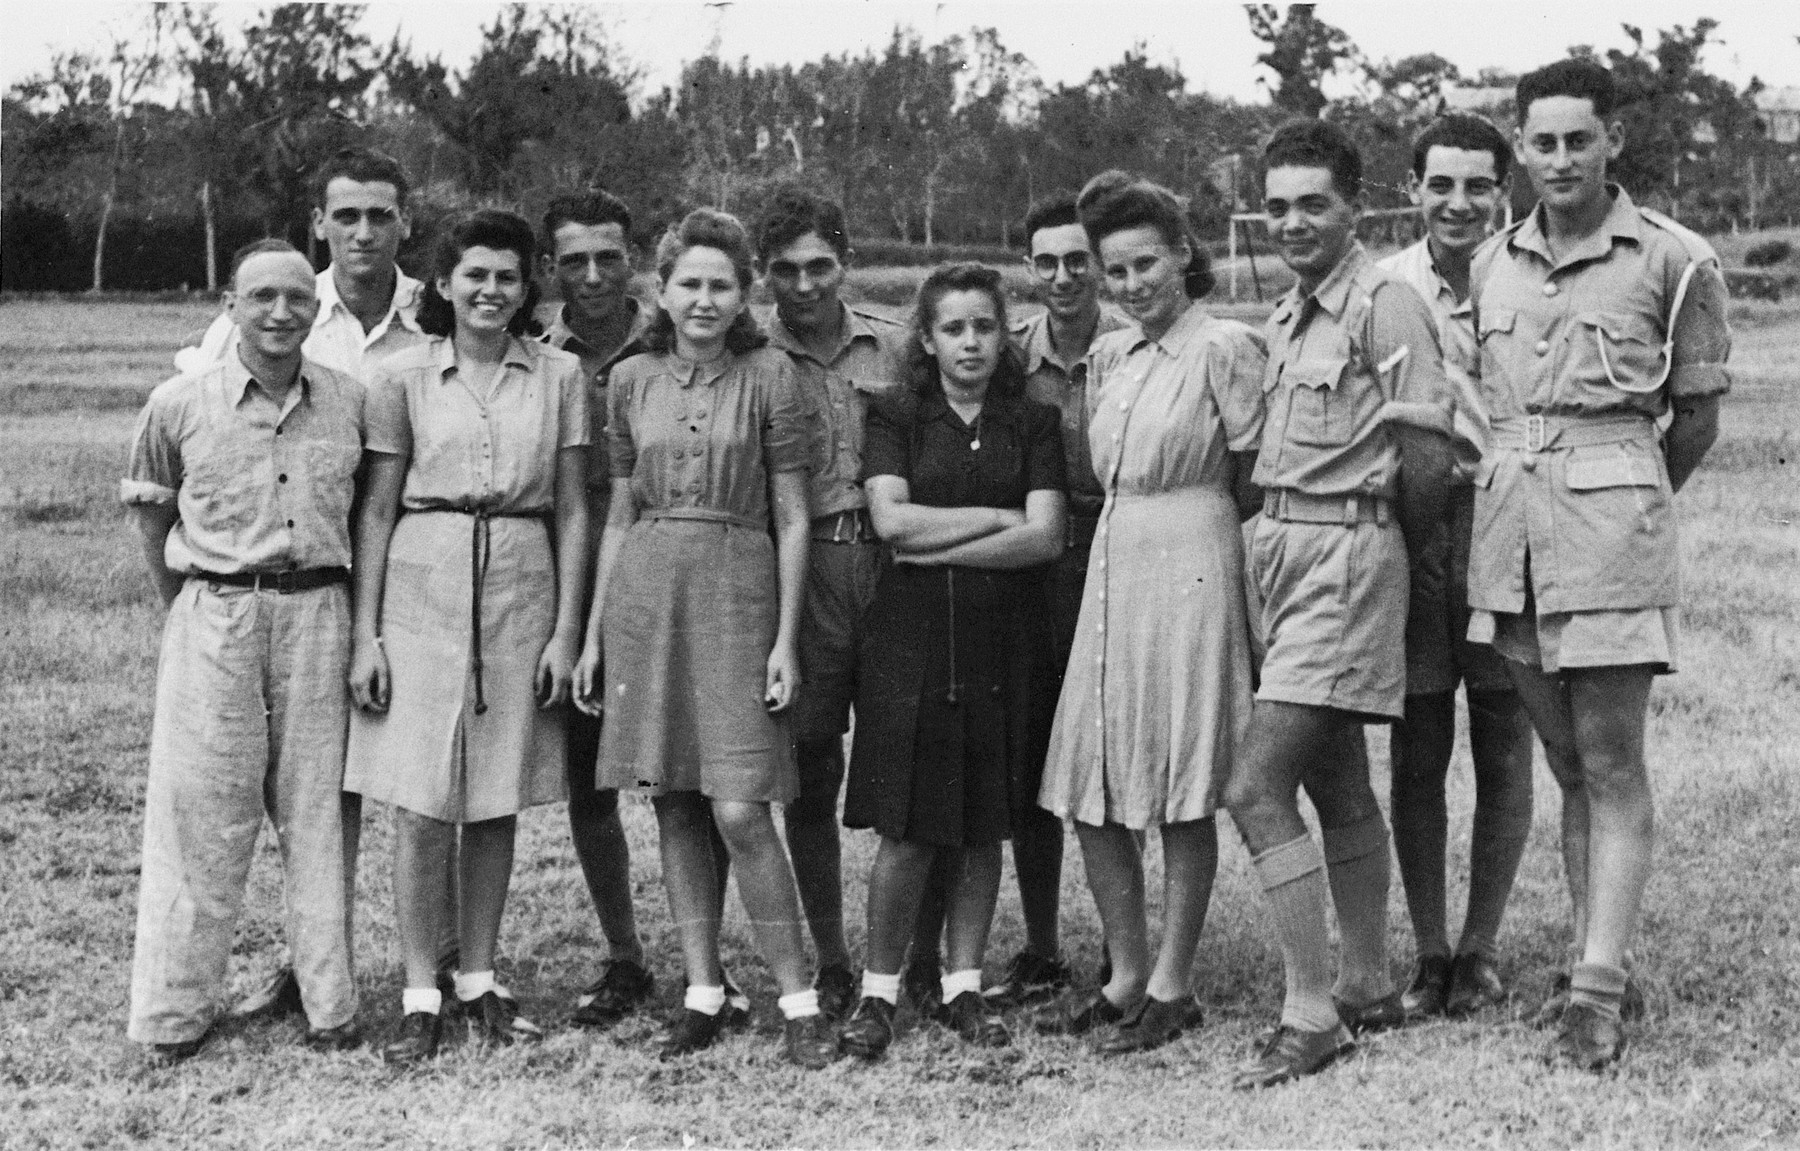 Jewish young people interned on the island of Mauritius.

Heinrich Wellisch is pictured fifth from the right.